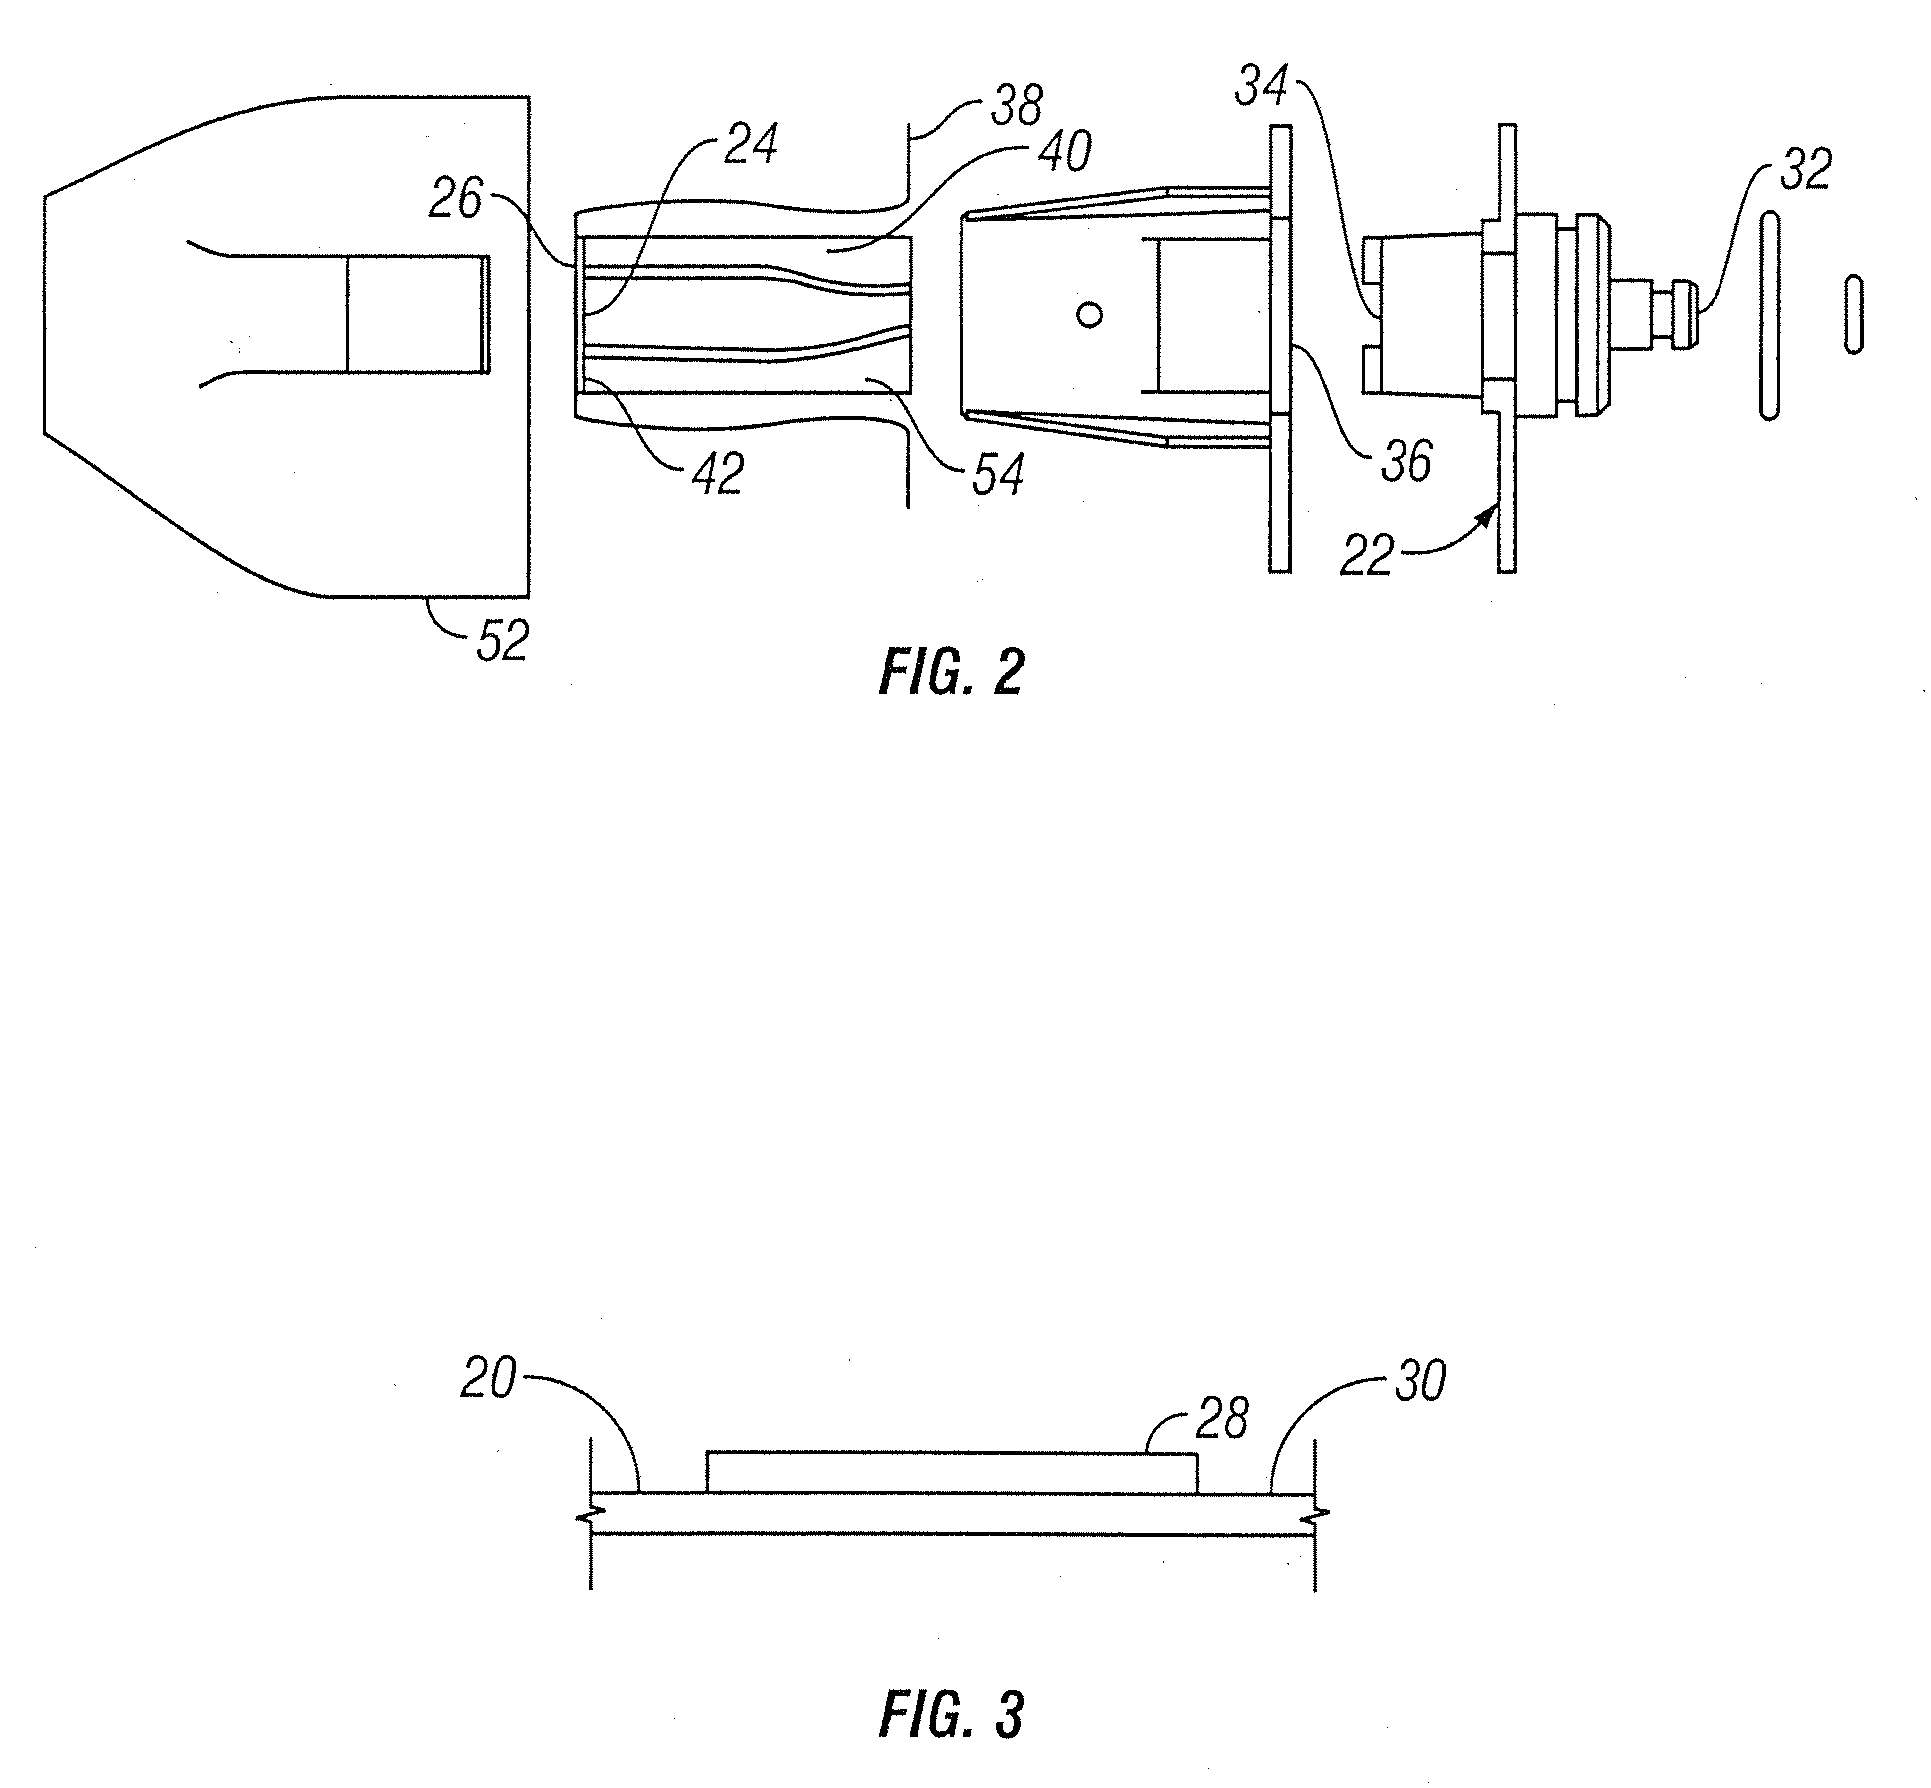 Energy delivery device for treating tissue